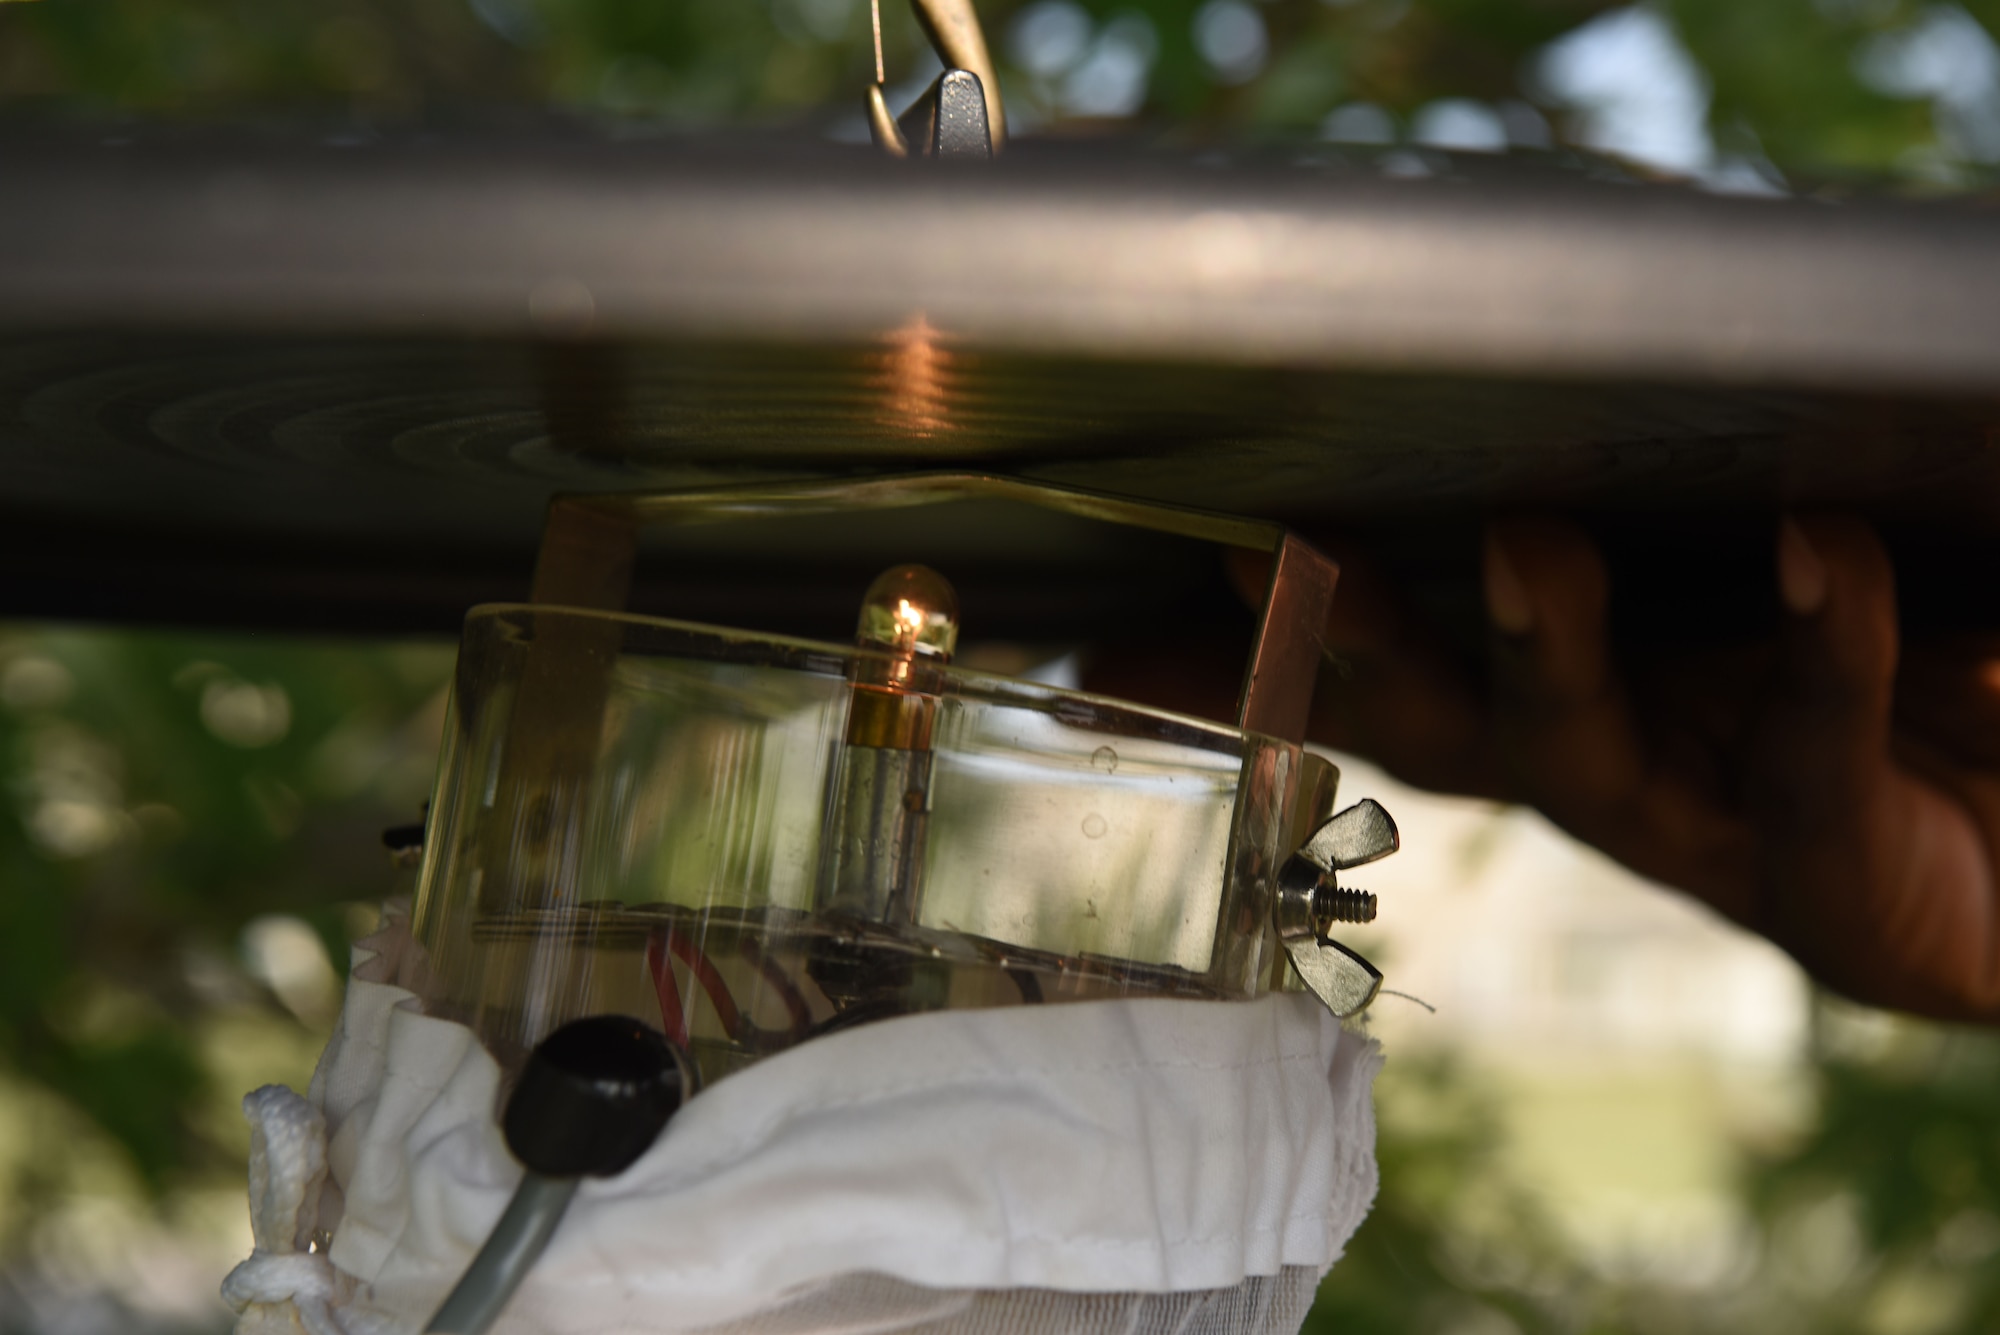 A trap is readied to collect mosquito specimen at Ellsworth Air Force Base, S.D., Aug. 13, 2018. Members assigned to the 28th Medical Group public health flight capture mosquitoes on a continuous basis to be sent off and tested for diseases, such as the West Nile virus. (U.S. Air Force photo by Airman 1st Class Thomas Karol)